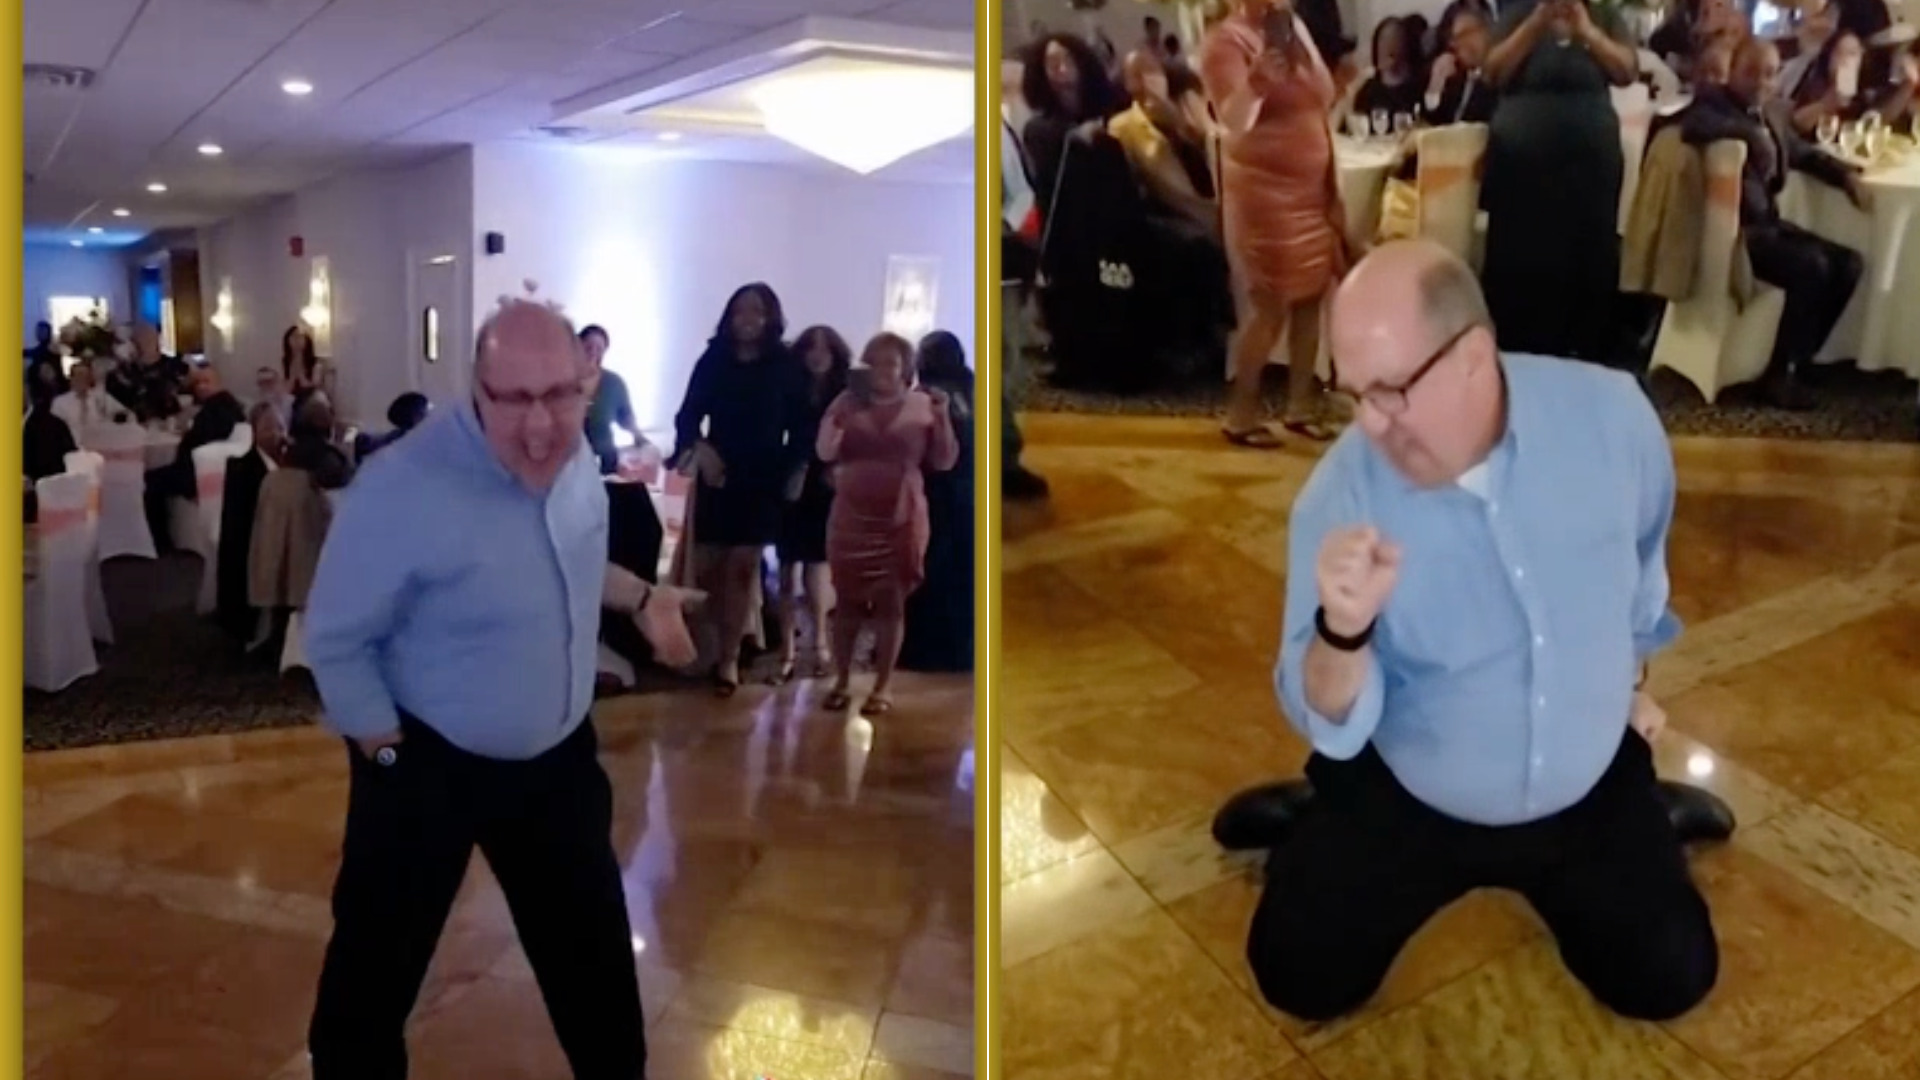 Man leaves it all on the dance floor in viral wedding video